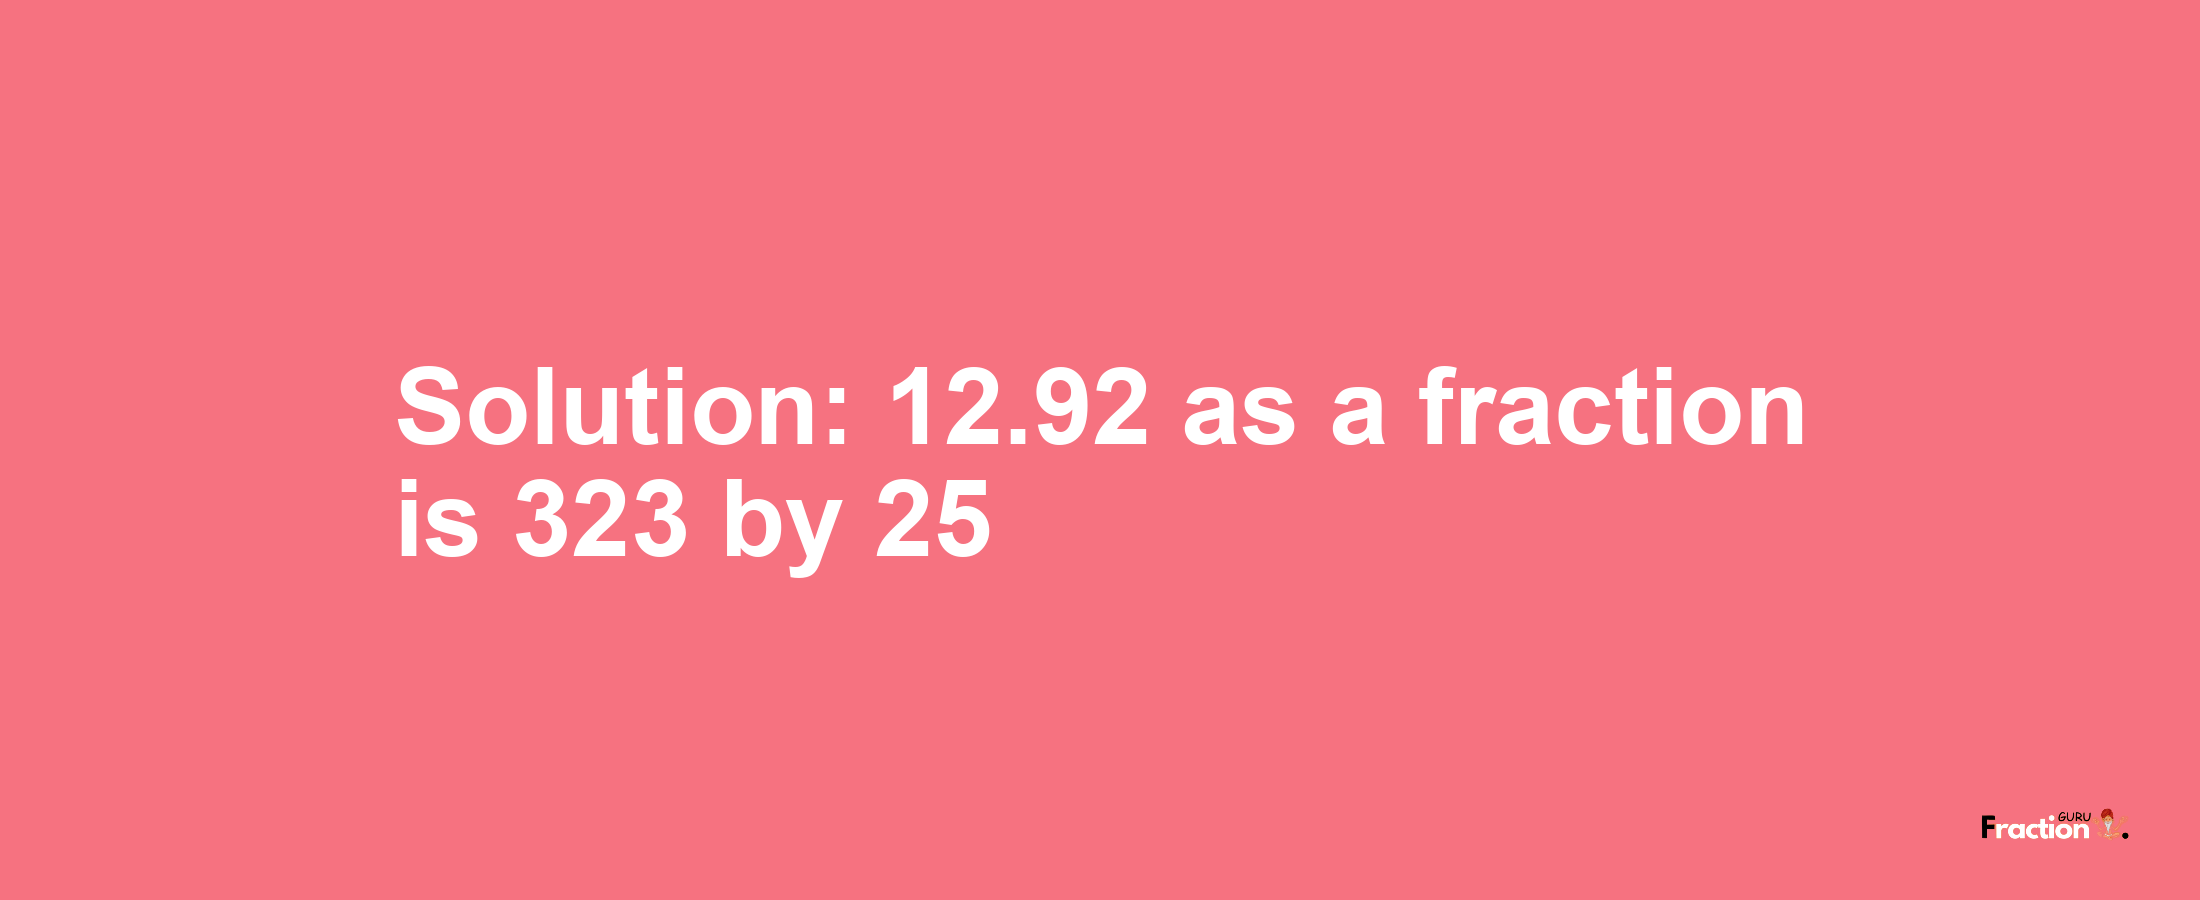 Solution:12.92 as a fraction is 323/25